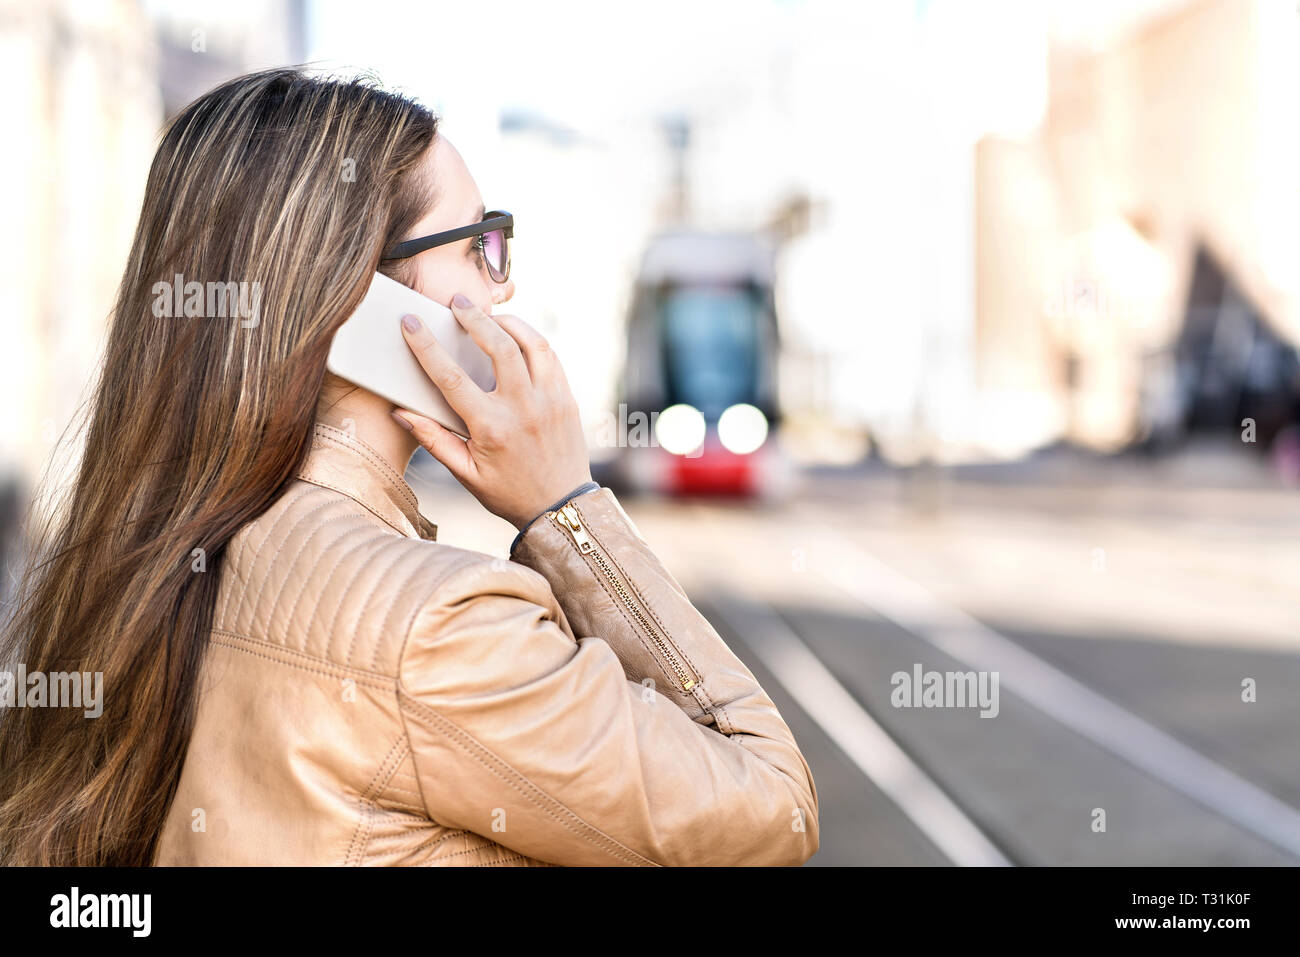 Busy businesswoman having a phone call while waiting for tram. Young woman with smartphone standing in city street. Electric train in the background. Stock Photo